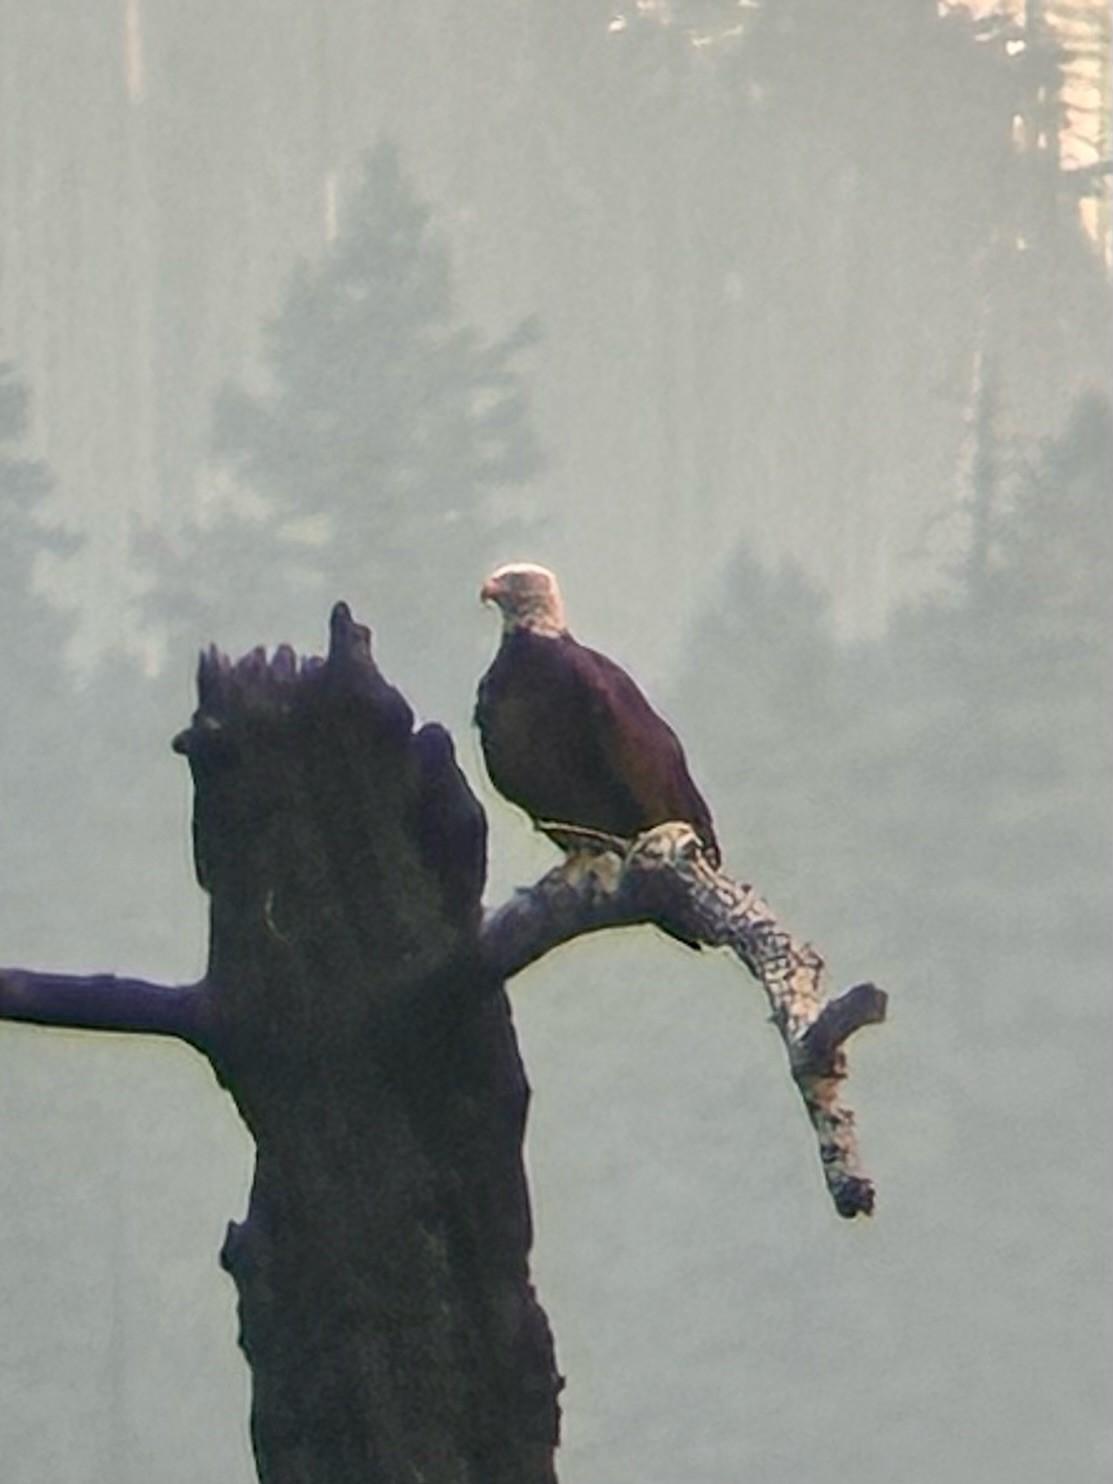 Image of a bald eagle sitting on a snag with smoke making the trees behind hazy. Photo USDA Forest Service courtesy Mike Spaulding